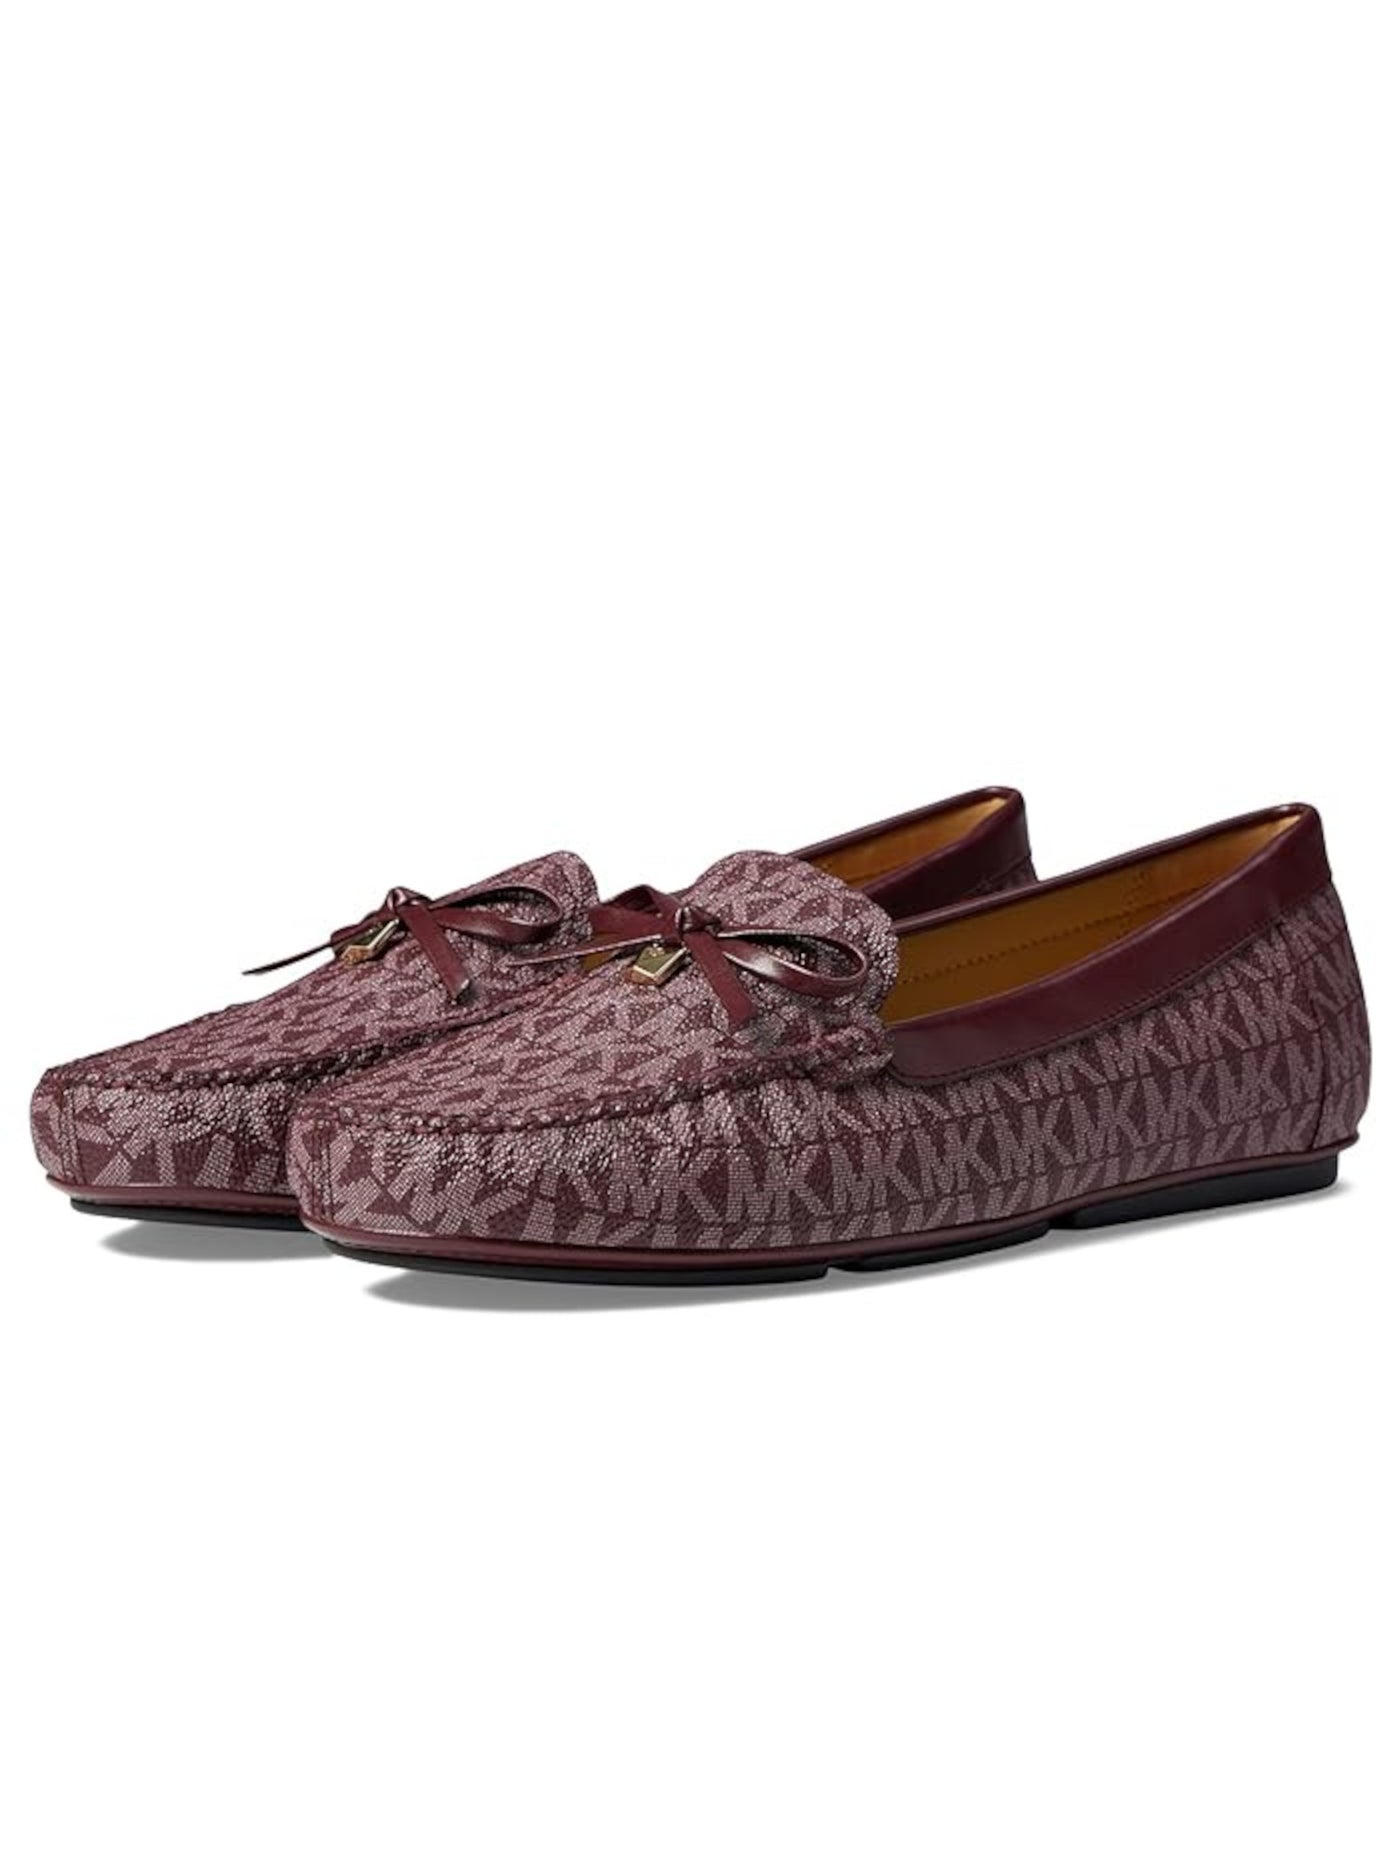 MICHAEL MICHAEL KORS Womens Burgundy Logo Bow Accent Padded Juliette Almond Toe Slip On Loafers Shoes 5.5 M